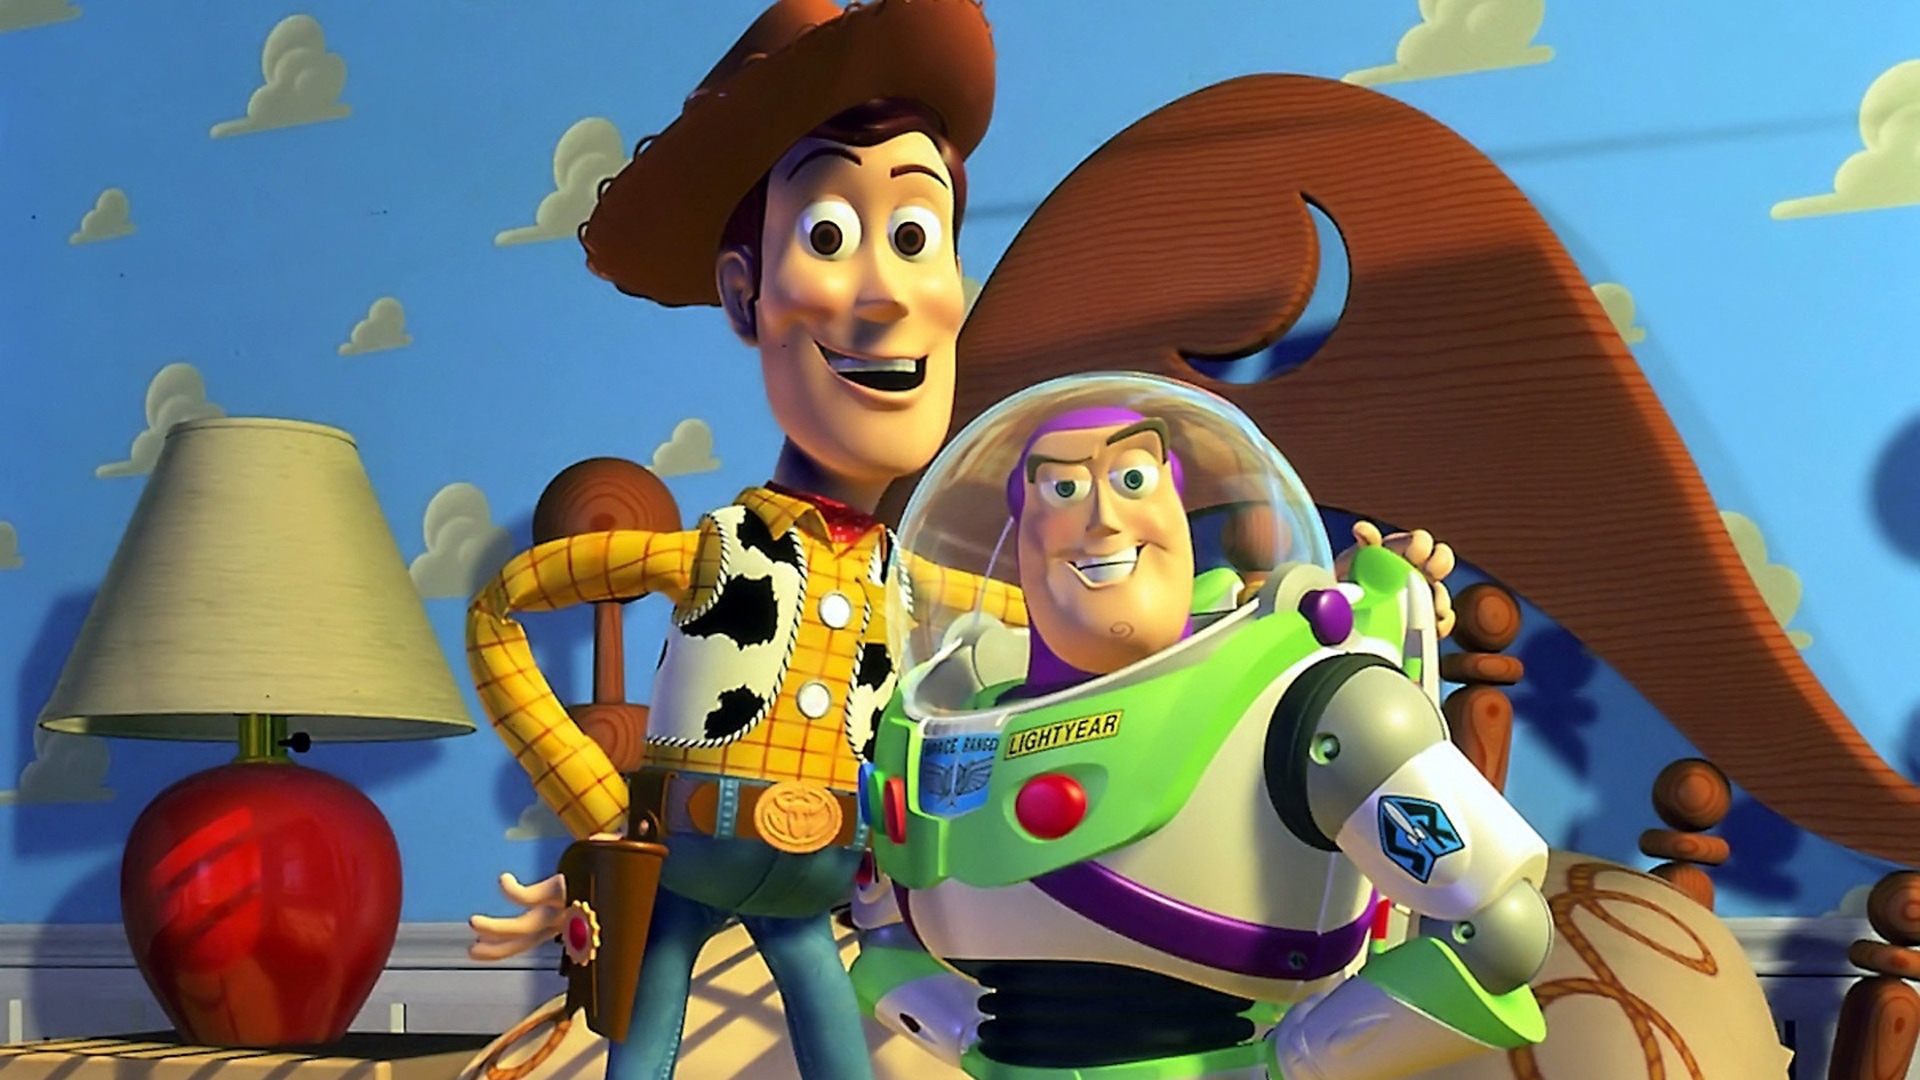 Toy Story Characters for 1920 x 1080 HDTV 1080p resolution